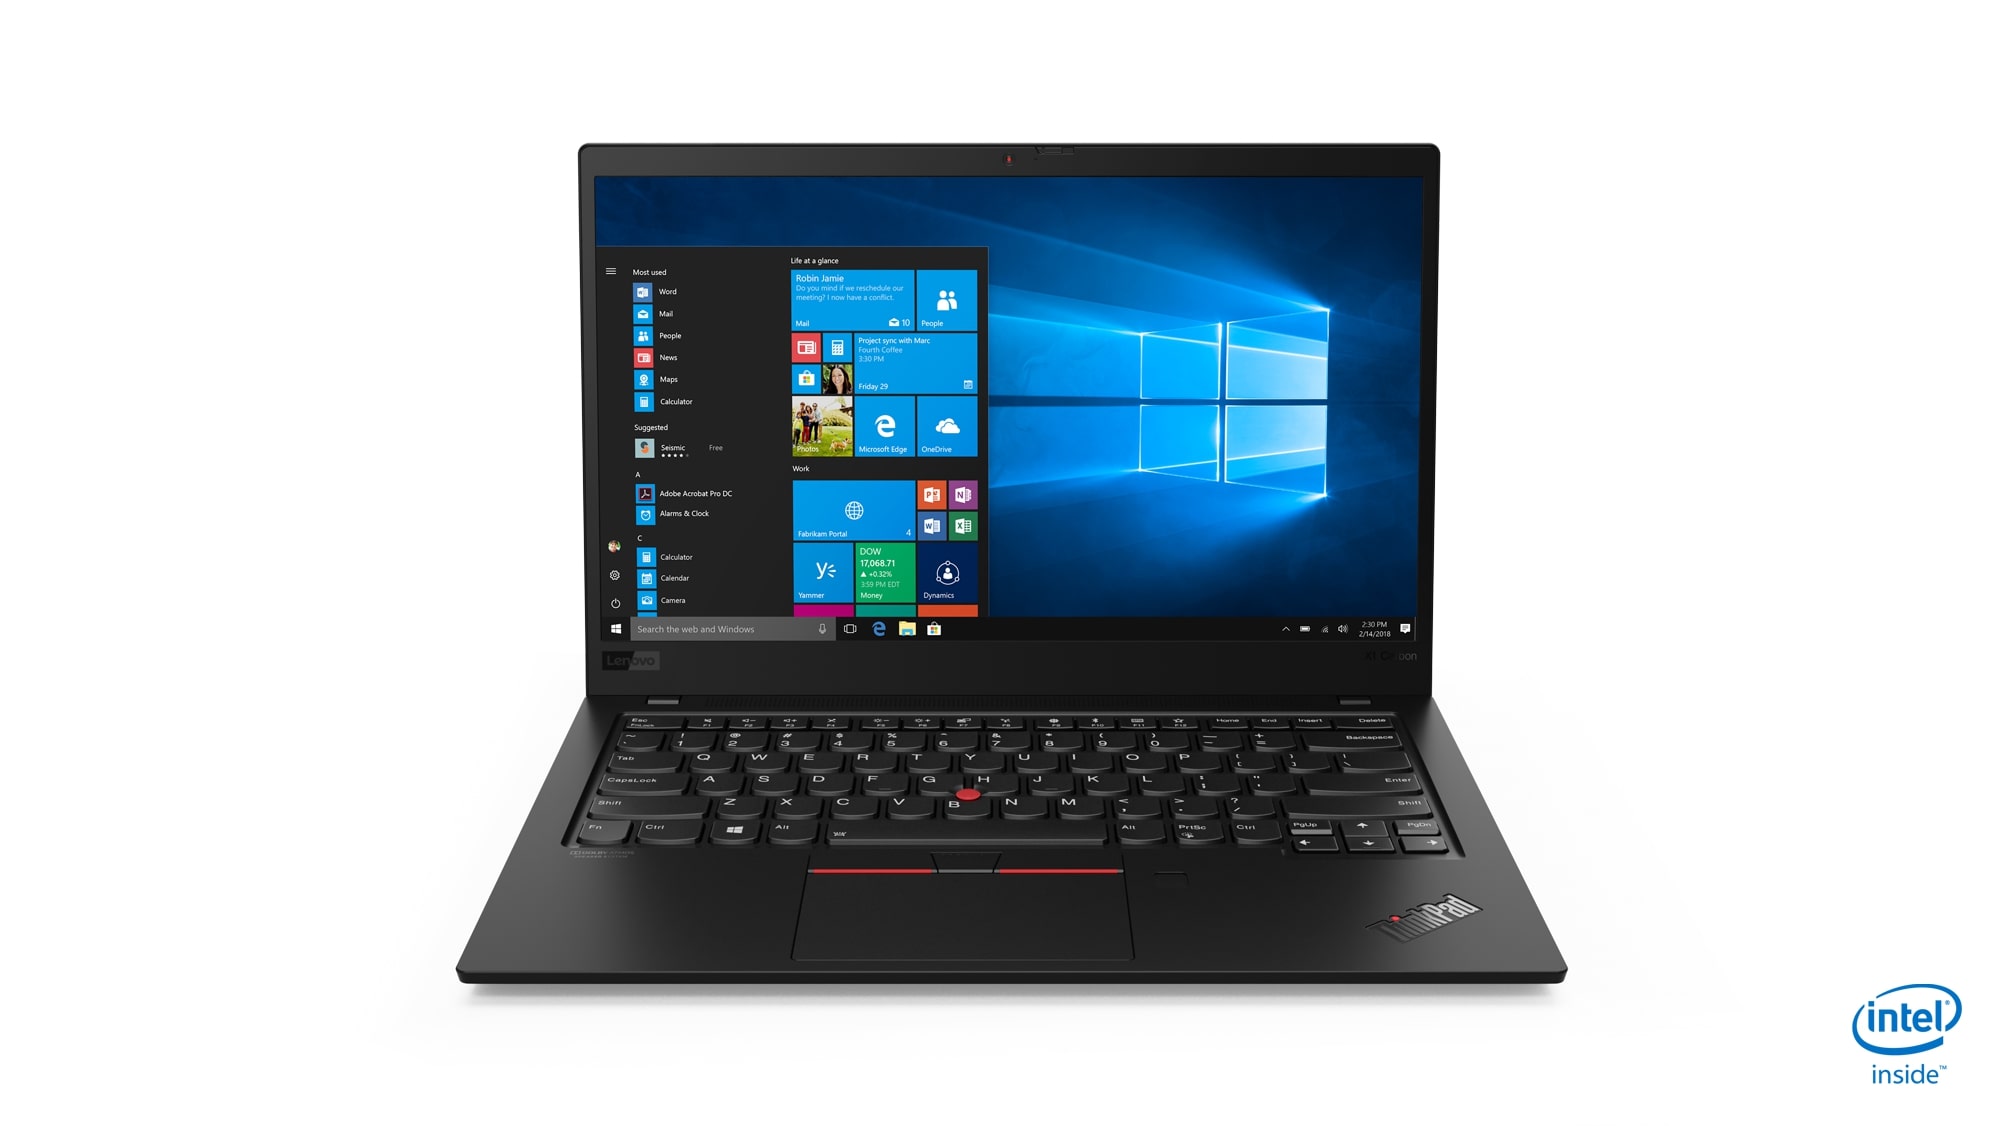 lenovo annouces new thinkpads with 10th gen cometlake 02 x1 carbon hero front facing jd